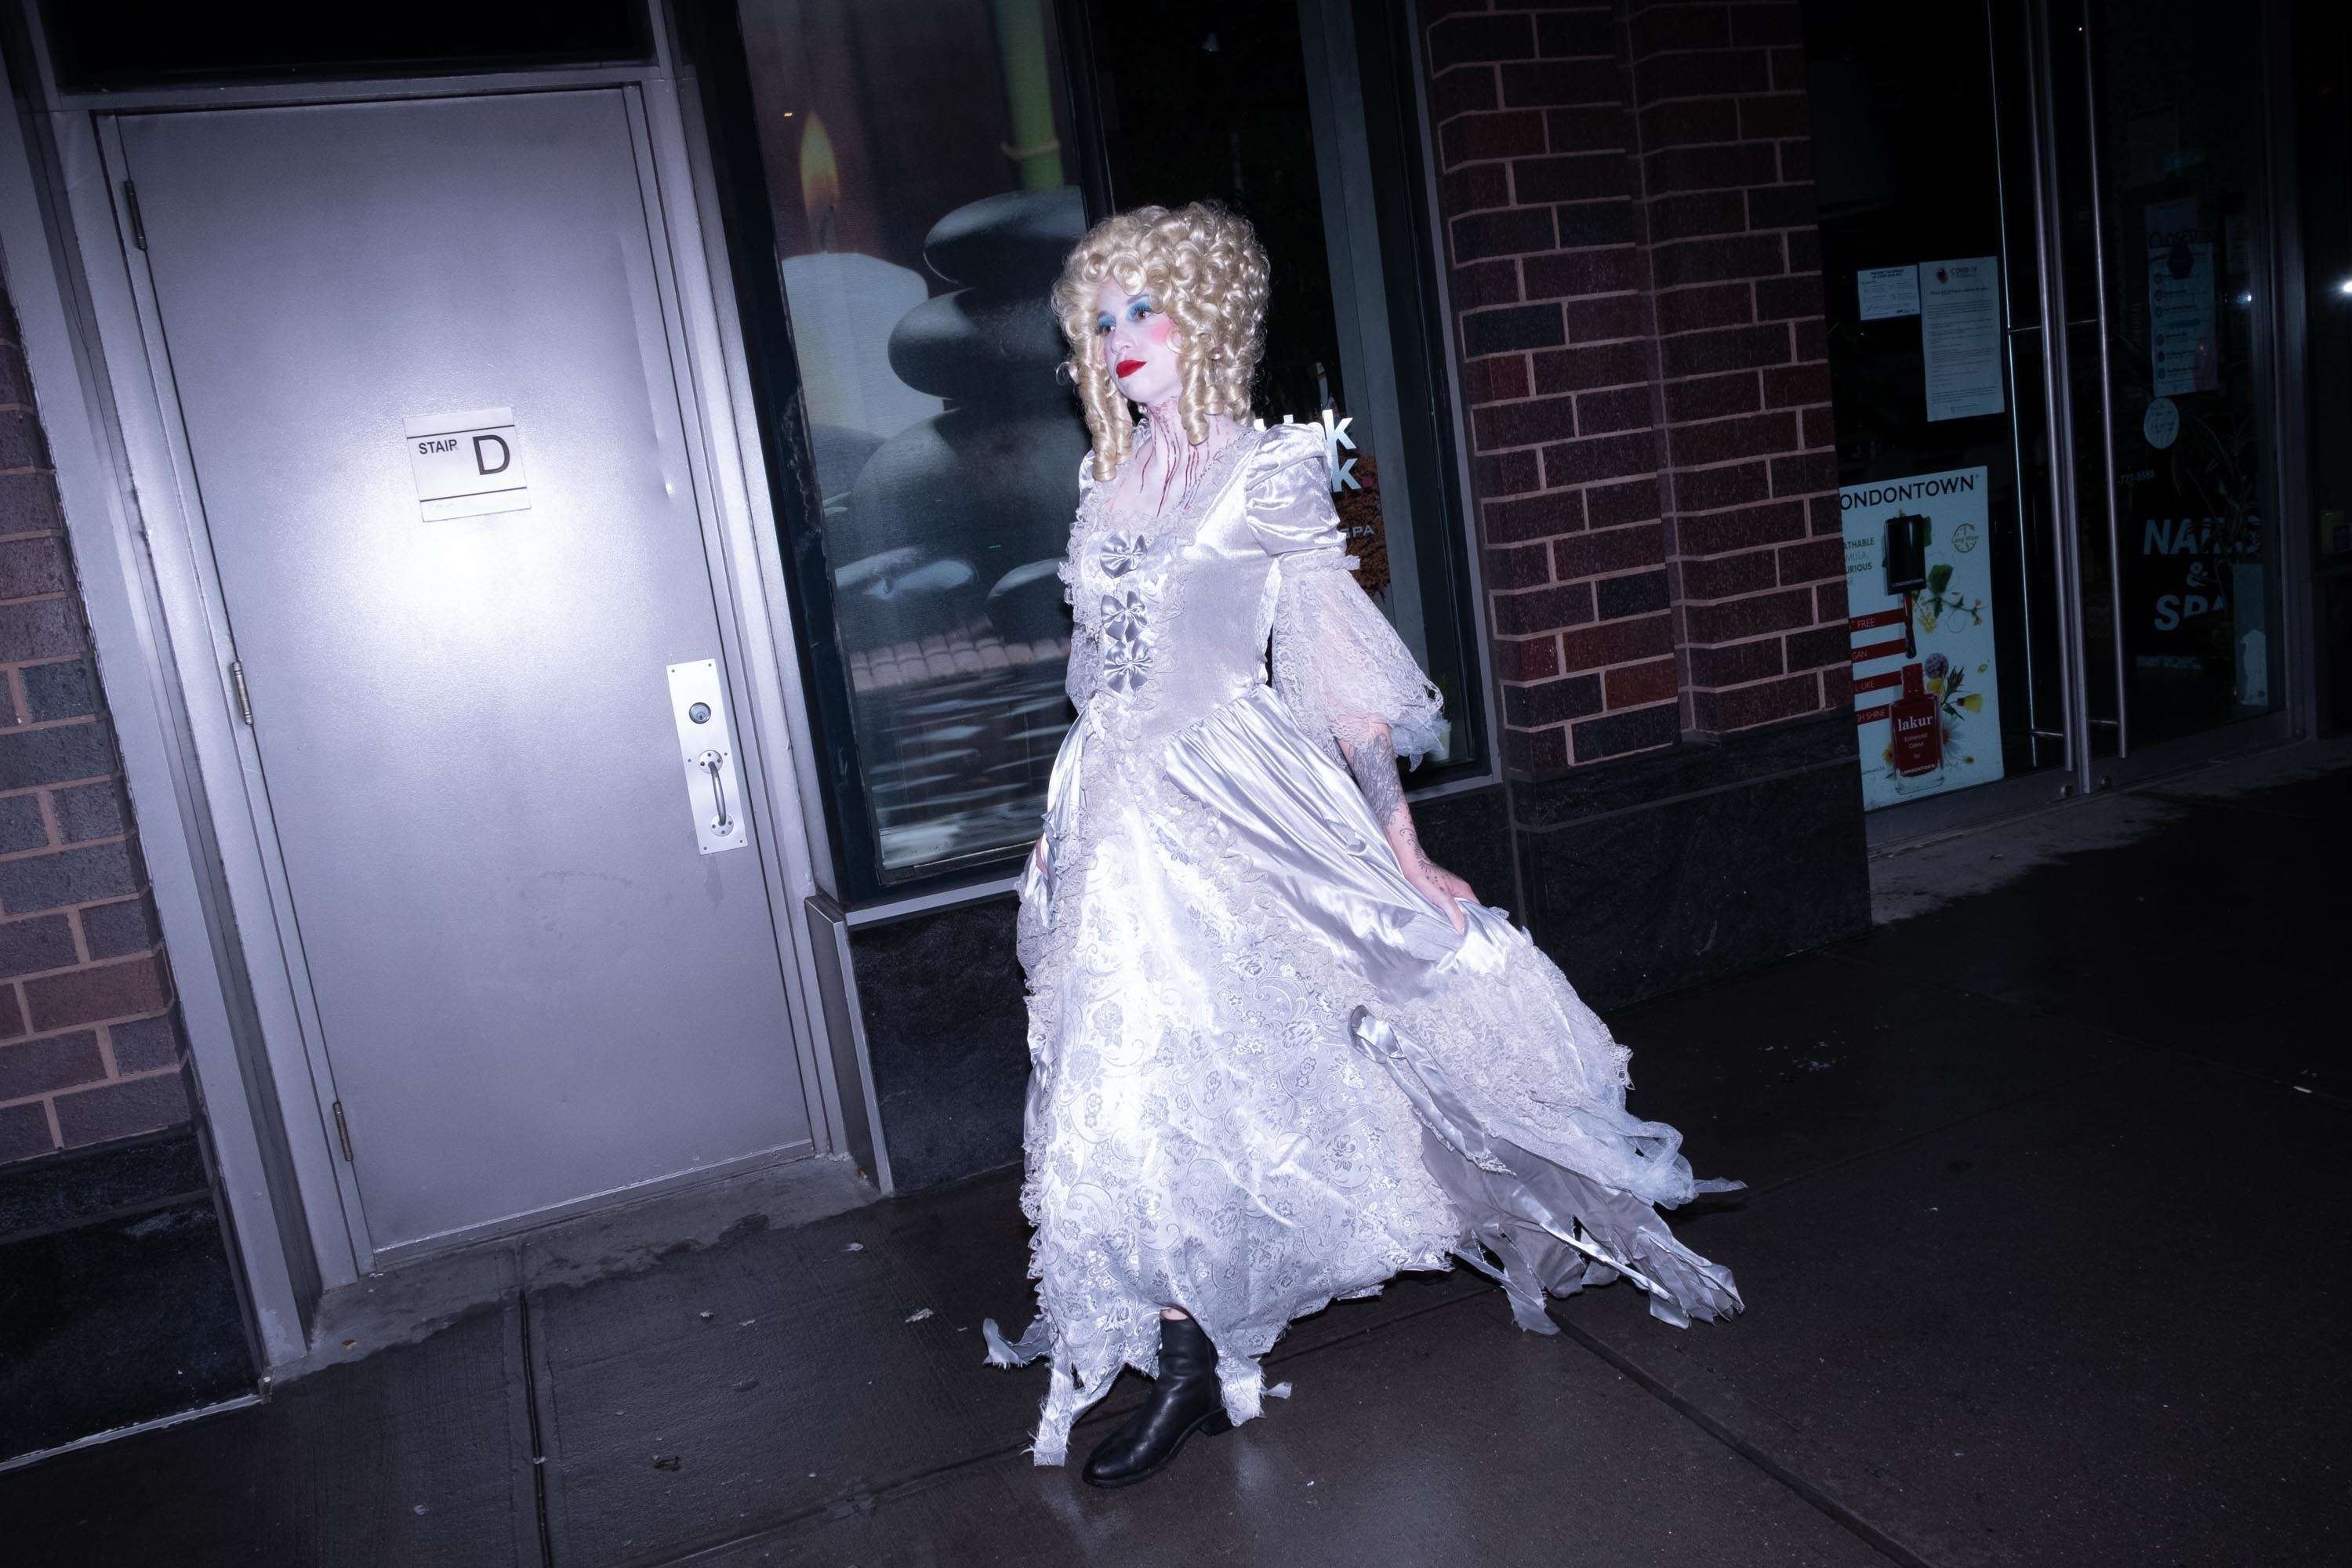 A ghostly marie antoinette walking in front of a door that says stair D on the street